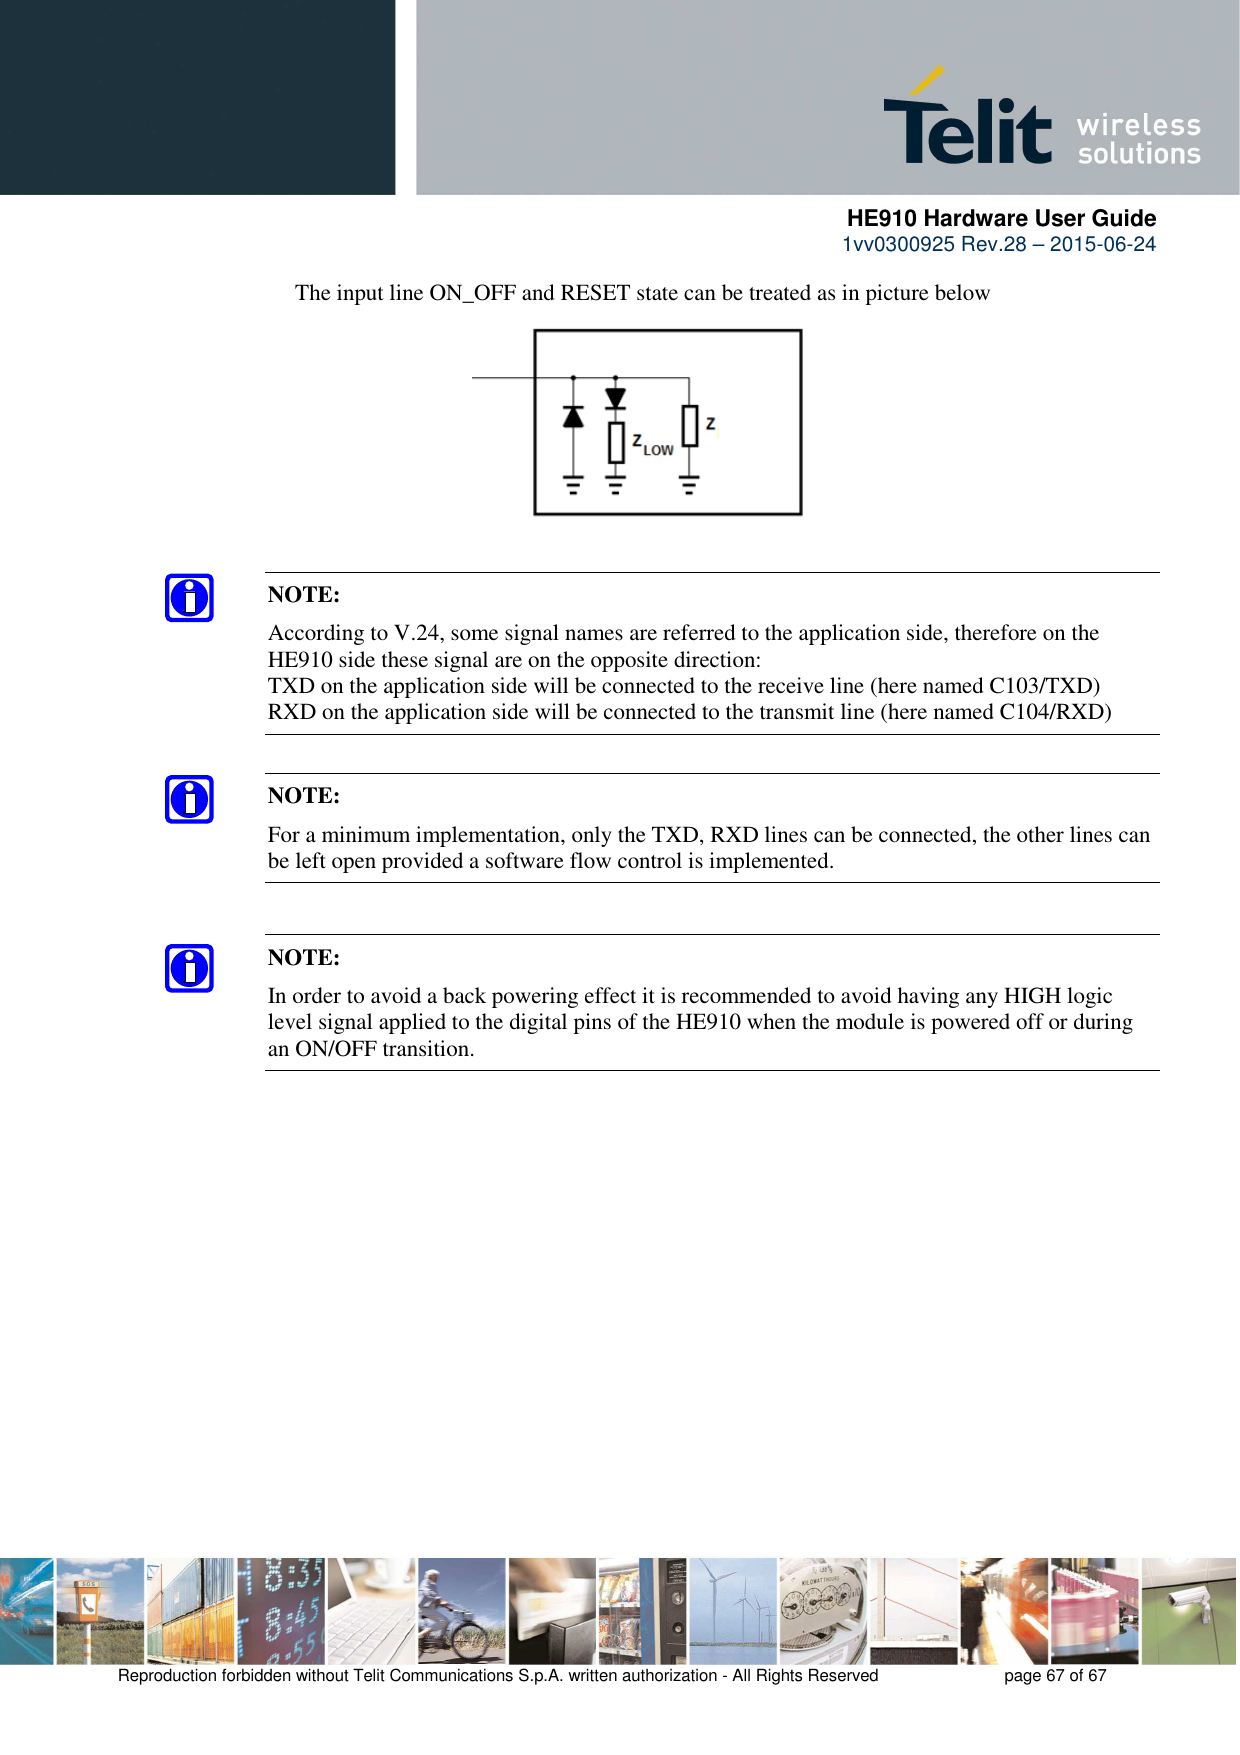      HE910 Hardware User Guide 1vv0300925 Rev.28 – 2015-06-24    Reproduction forbidden without Telit Communications S.p.A. written authorization - All Rights Reserved    page 67 of 67  The input line ON_OFF and RESET state can be treated as in picture below         NOTE: According to V.24, some signal names are referred to the application side, therefore on the HE910 side these signal are on the opposite direction:  TXD on the application side will be connected to the receive line (here named C103/TXD) RXD on the application side will be connected to the transmit line (here named C104/RXD)  NOTE: For a minimum implementation, only the TXD, RXD lines can be connected, the other lines can be left open provided a software flow control is implemented.  NOTE: In order to avoid a back powering effect it is recommended to avoid having any HIGH logic level signal applied to the digital pins of the HE910 when the module is powered off or during an ON/OFF transition.  